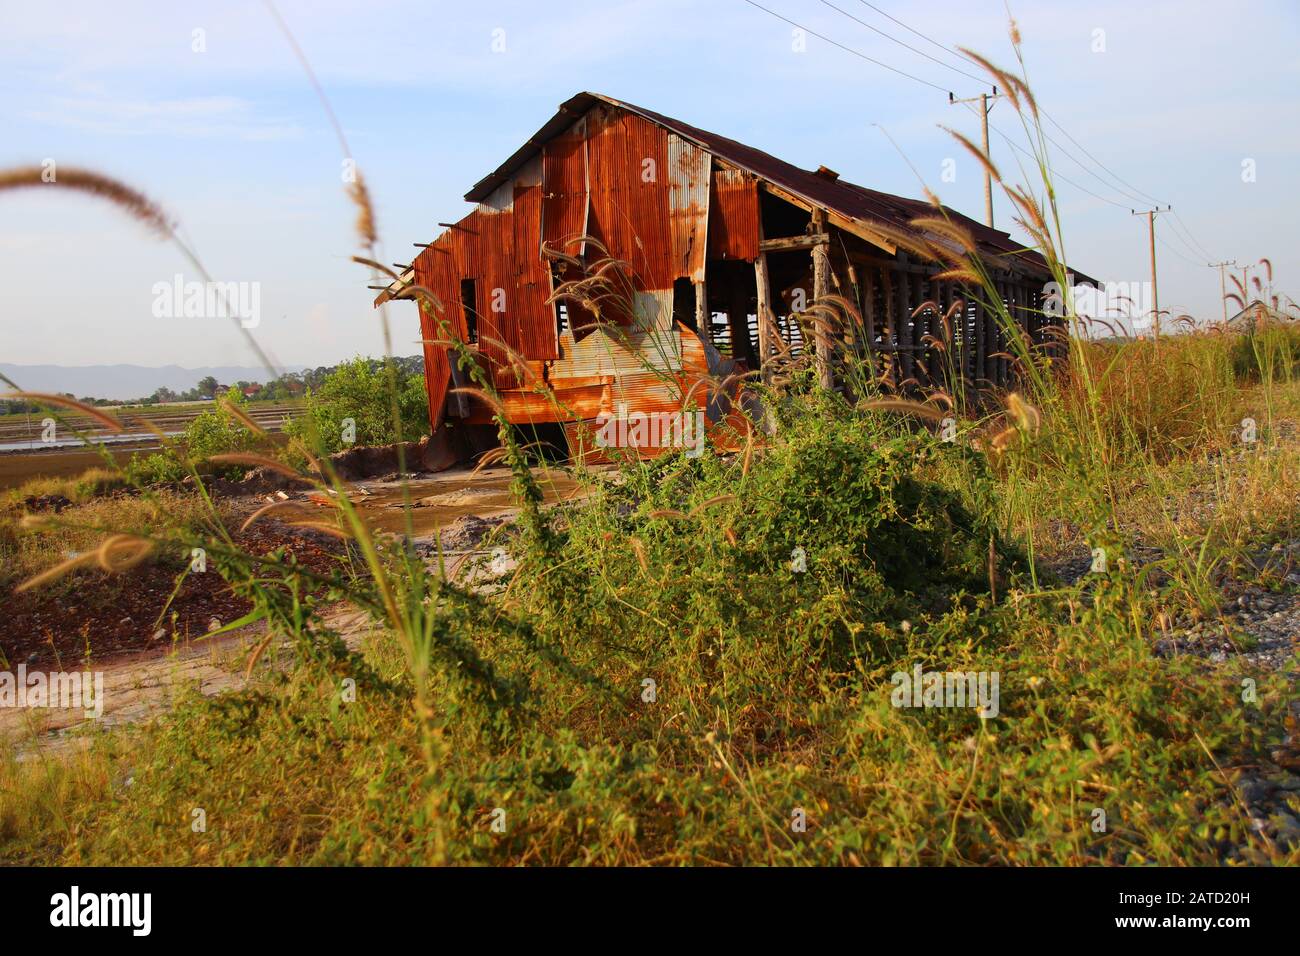 An old rusty tin house used to store harvested salt in the salt farms in Kampot, Cambodia Stock Photo